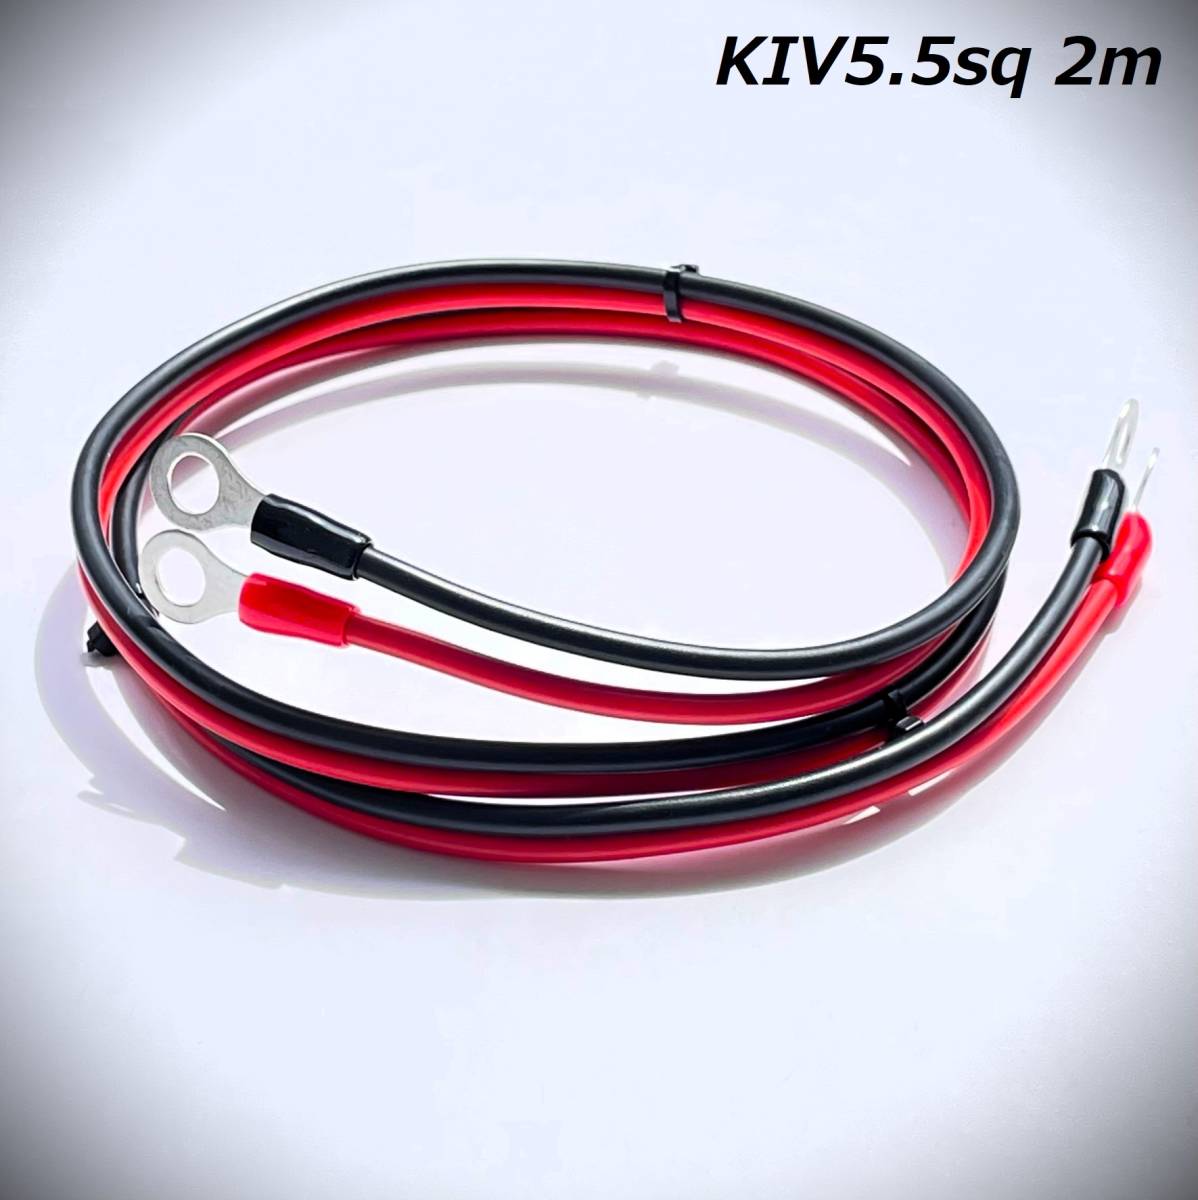 2m KIV5.5sq mileage charger for wiring inverter 